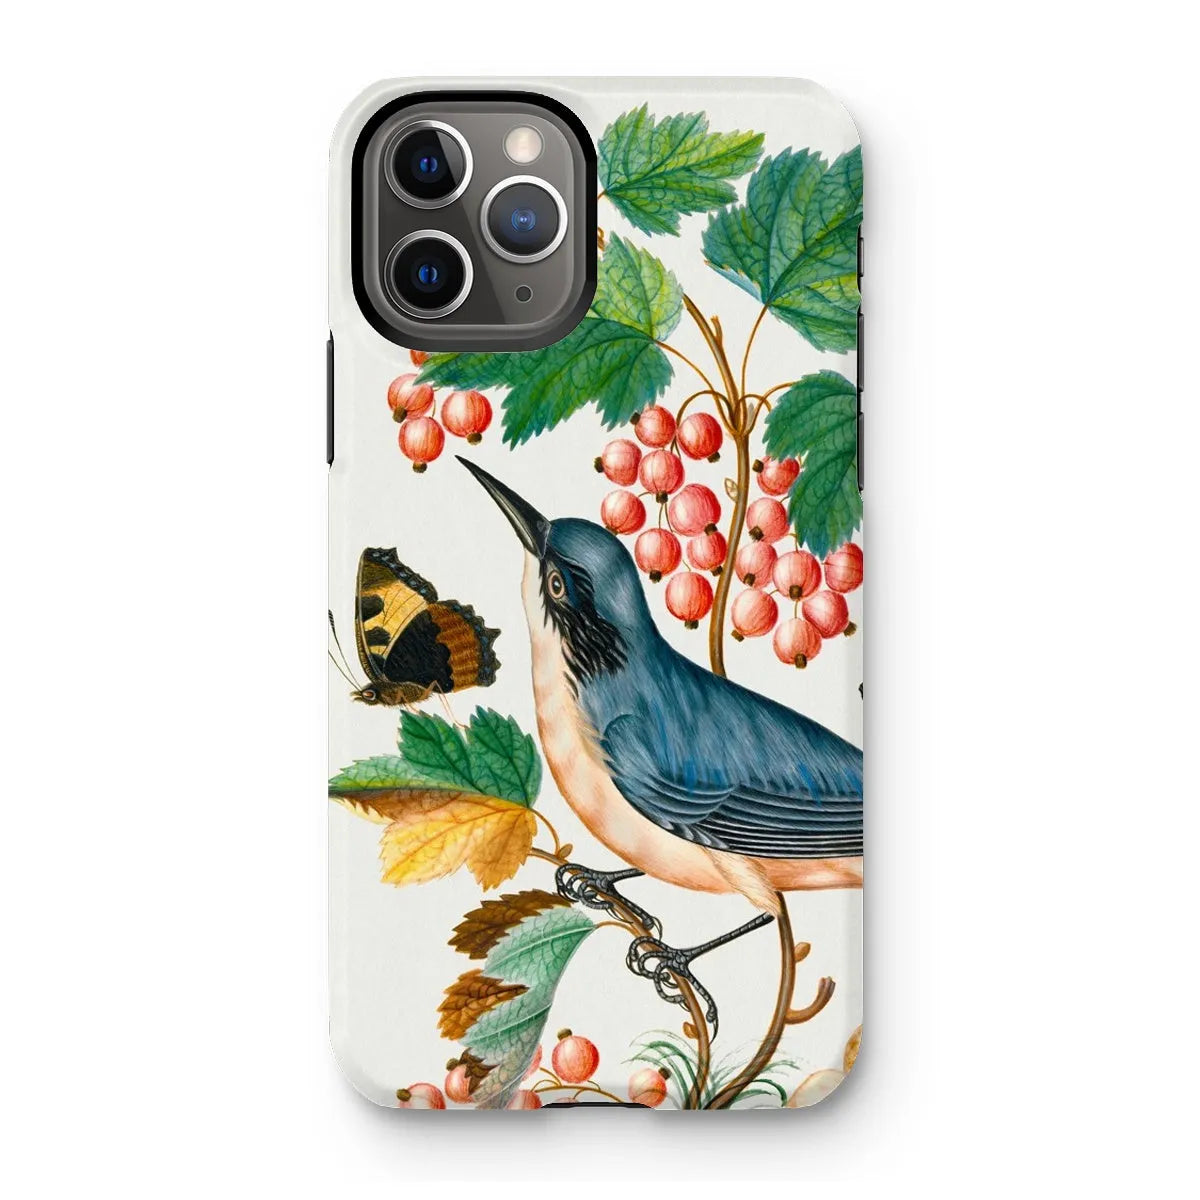 Warbler Admiral Wasps & Ants - Art Phone Case - James Bolton - Iphone 11 Pro / Matte - Mobile Phone Cases - Aesthetic